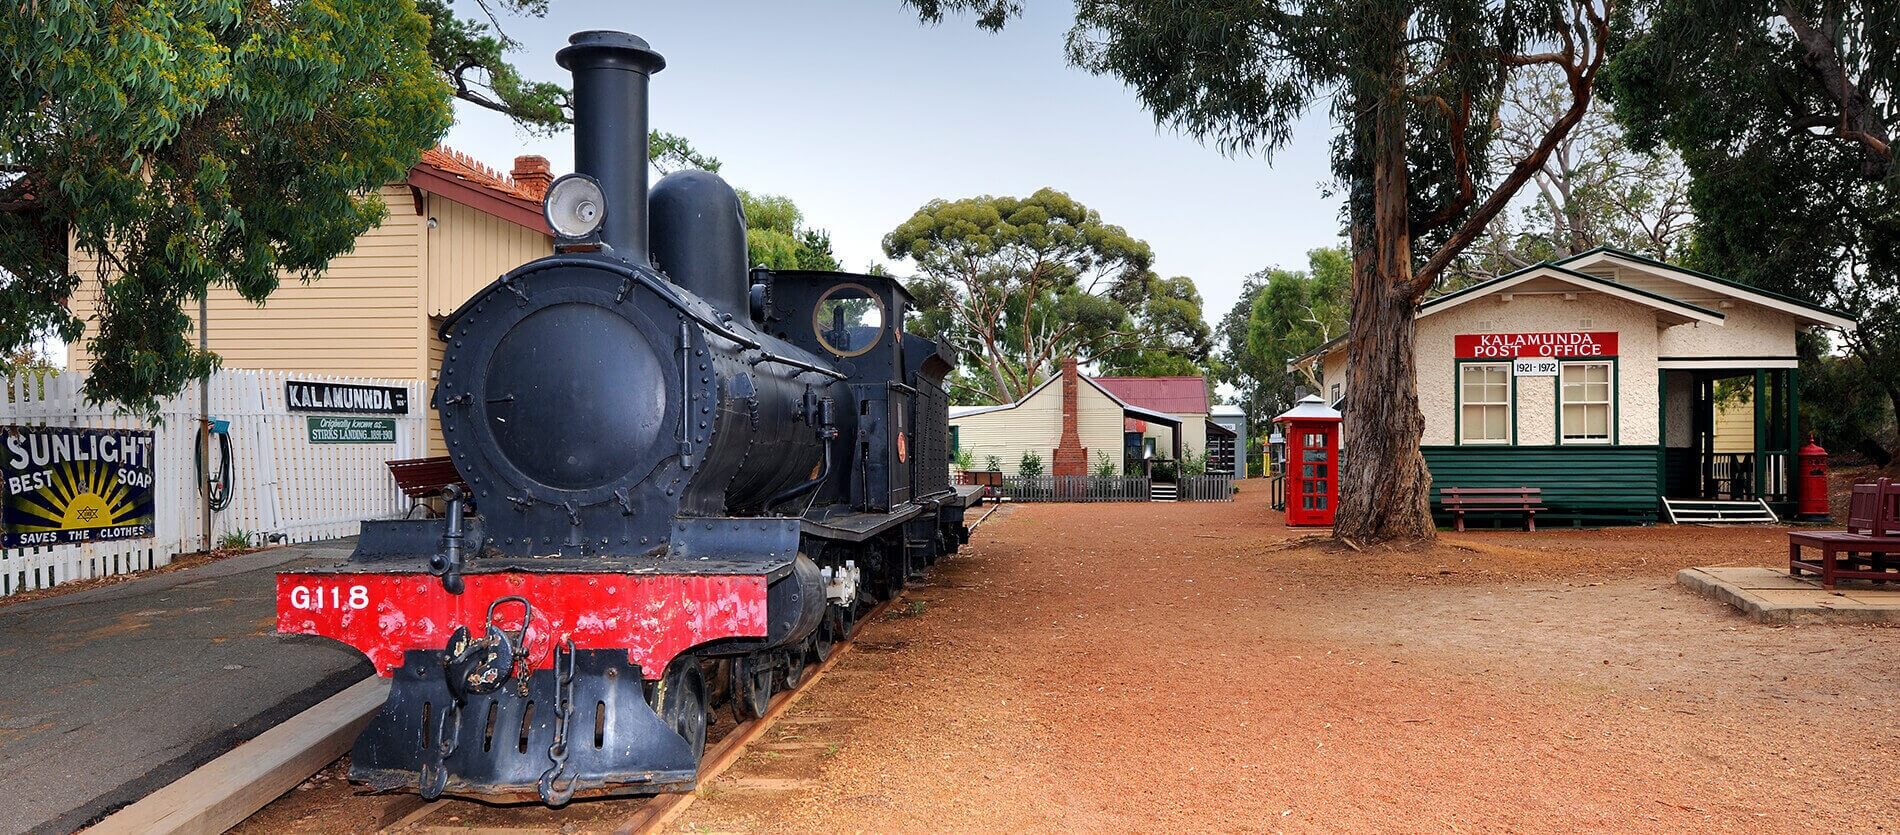 View of the Kalamunda History Village including the steam train and other outbuildings